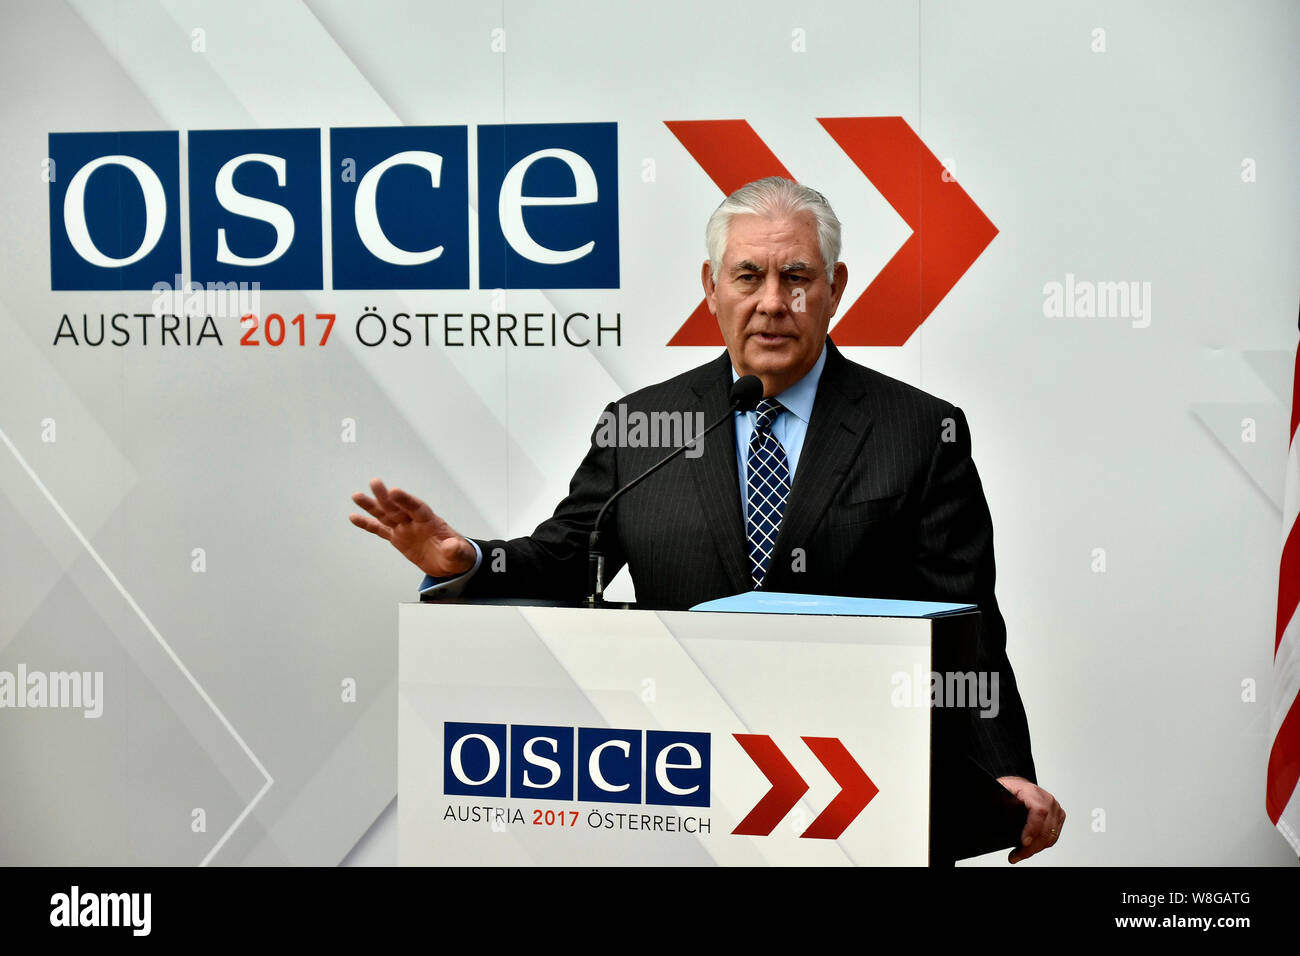 U.S. Secretary of State Rex Tillerson addresses the media at the 2017 Organization for Security and Co-operation in Europe (OSCE) Ministerial Council Stock Photo